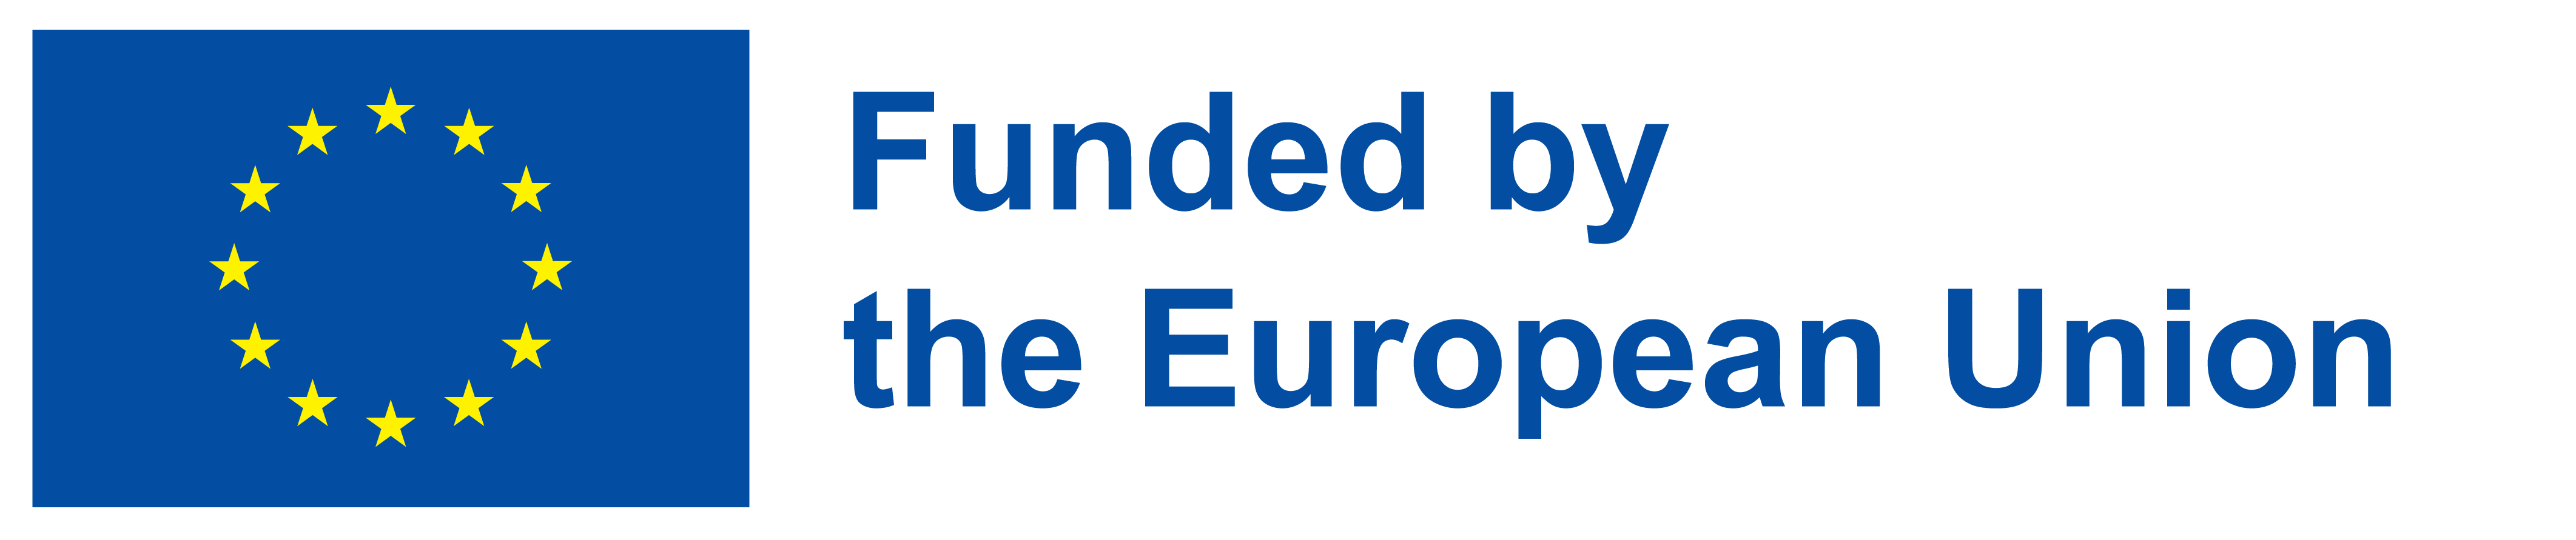 On the left, the EU flag of yellow stars on a field of blue. On the right the words "Funded by the European Union" in blue text on a white background.